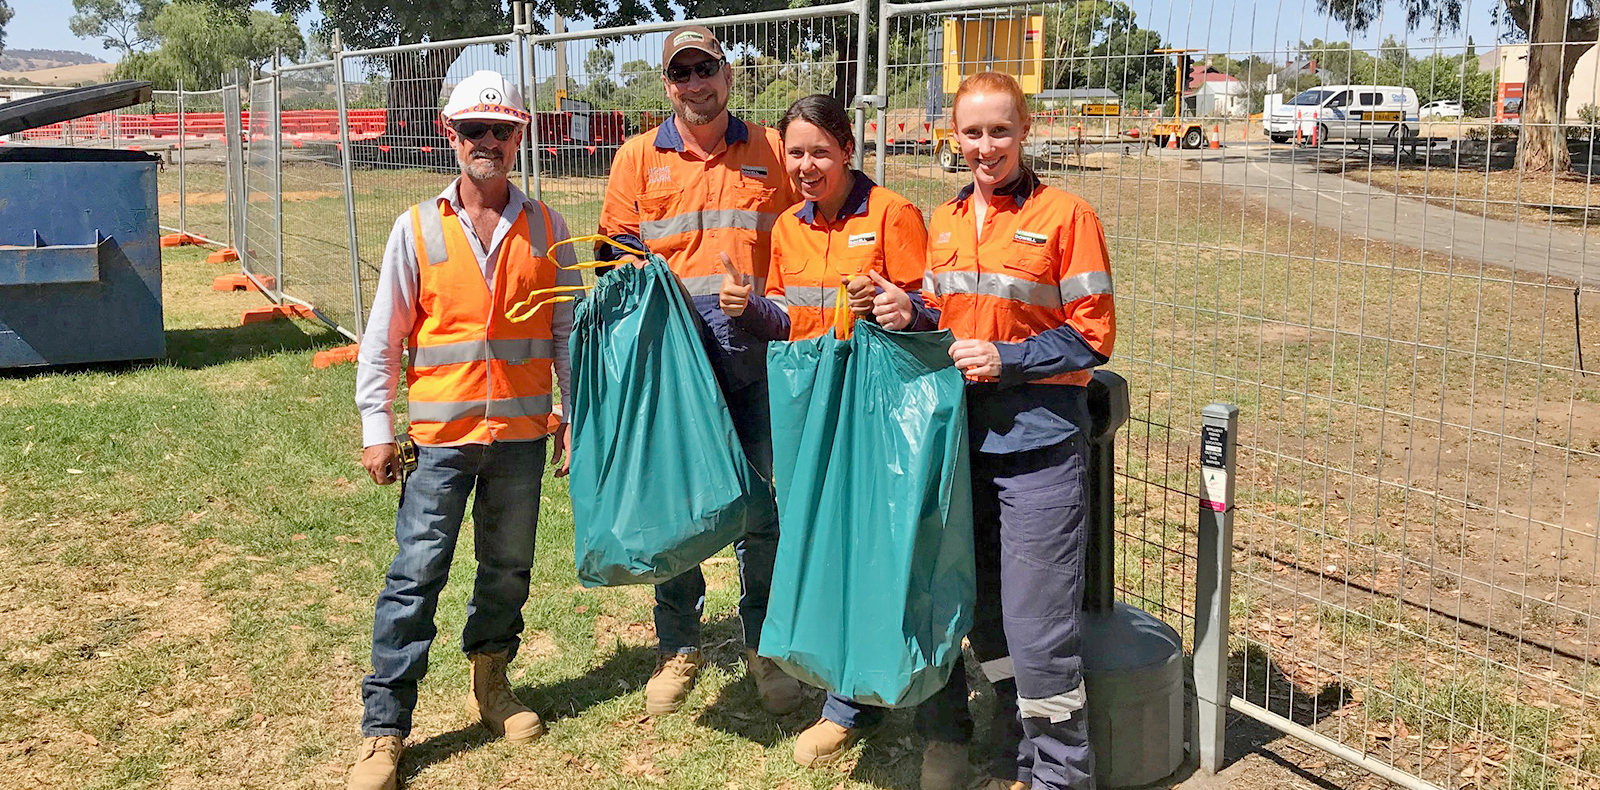 Four DPTI staff wearing hi-vis clothing are holding partially filled rubbish bags. There are two men on the left and two women on the right and they are standing in front of a rectangular mesh wire fence with a worksite behind it.